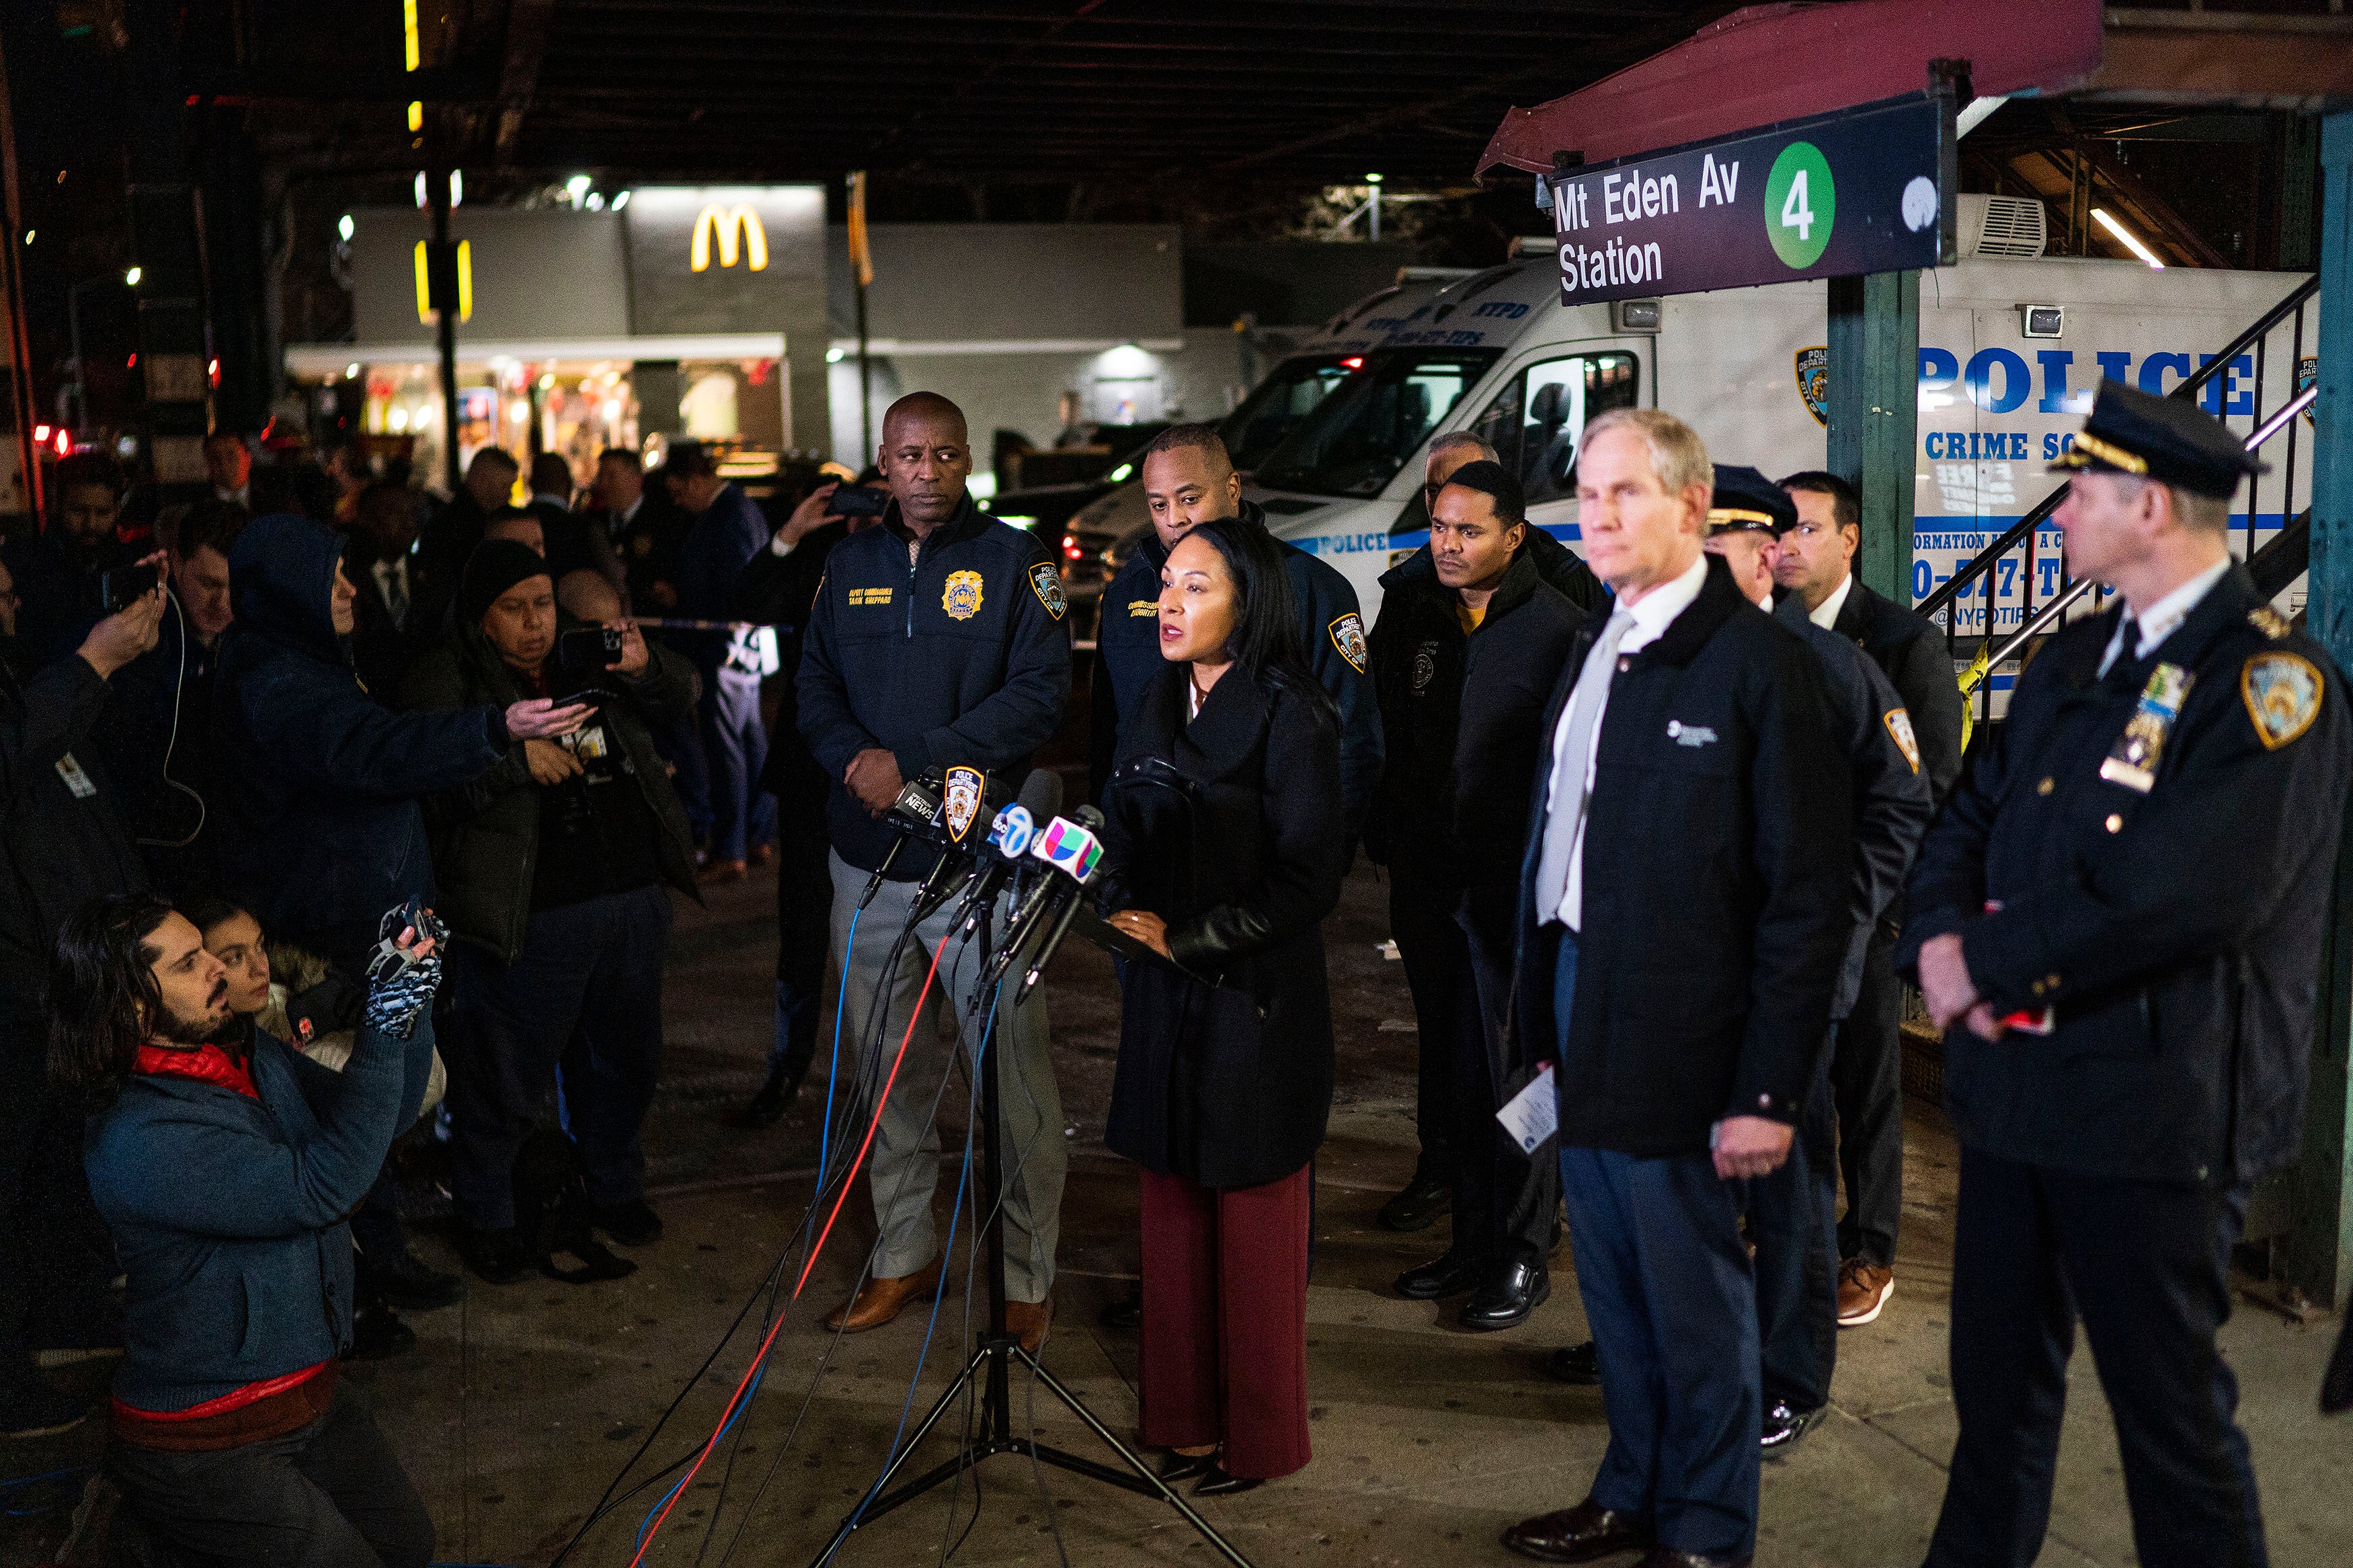 NYPD’s Tanya Kinsella speaks to the media after the shooting